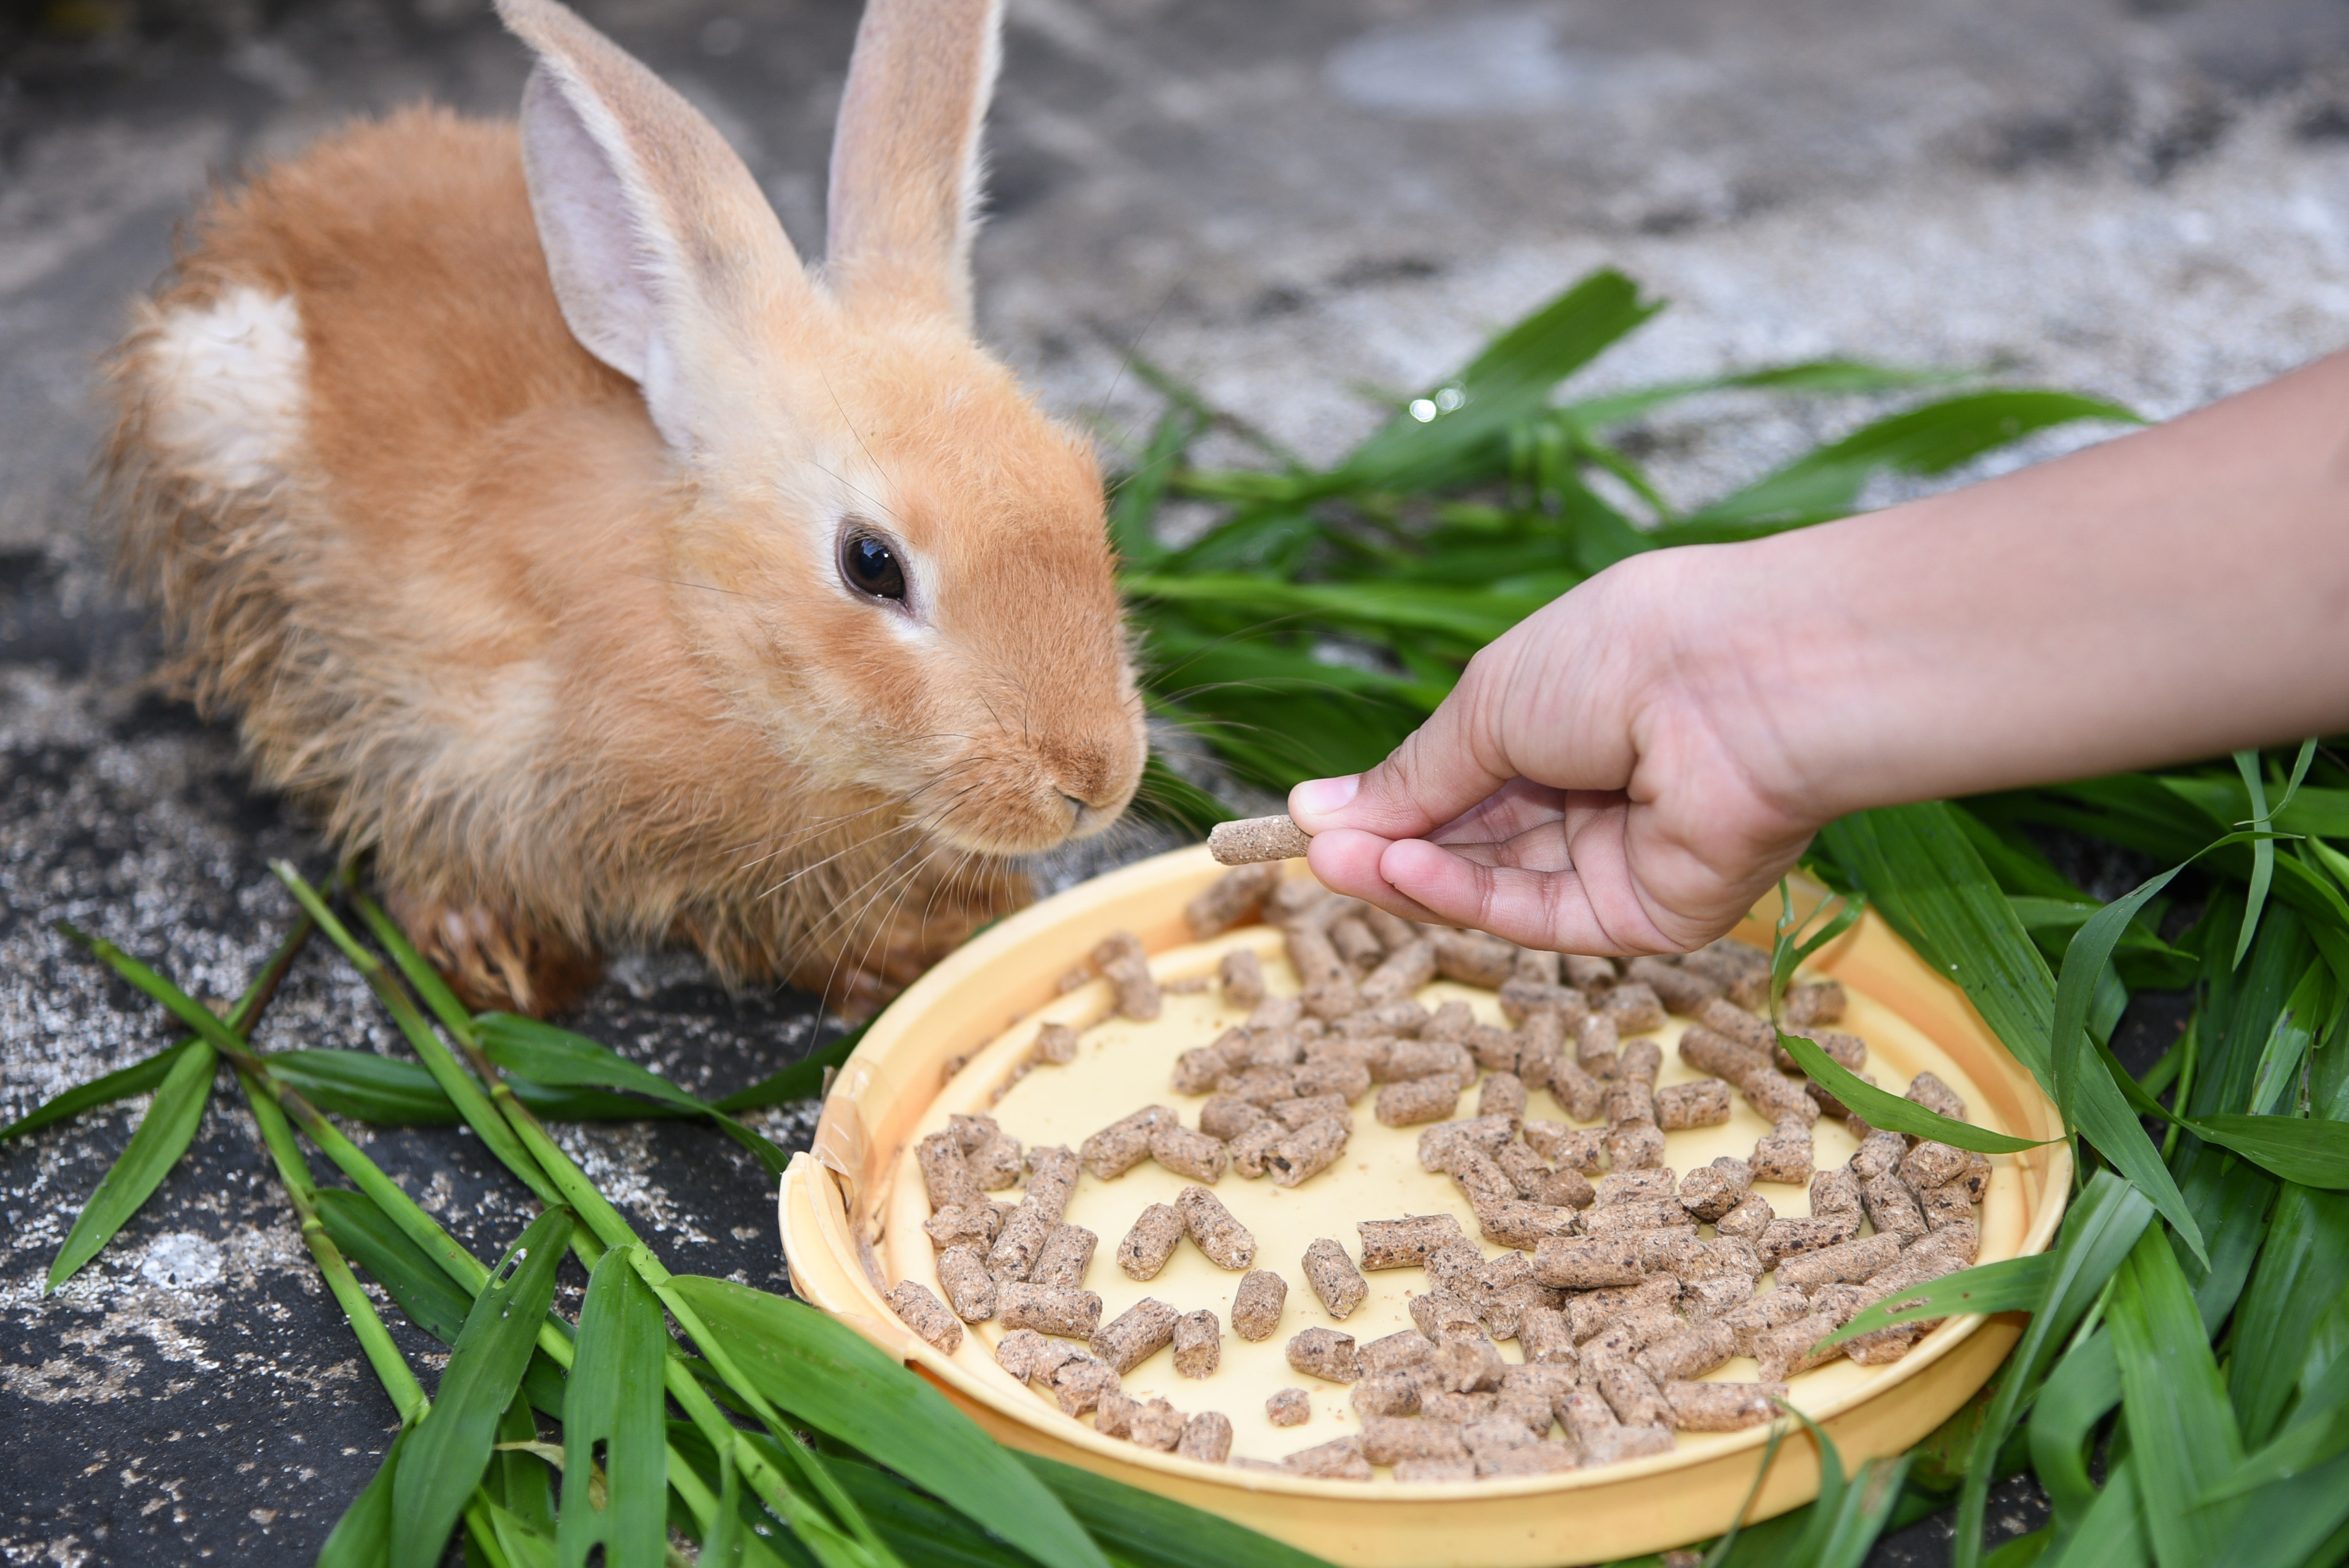 Eight out of 12 products tested by the Consumer Council needed to provide more precise instructions to prevent consumers from overfeeding their rabbits. Photo: Shutterstock Images